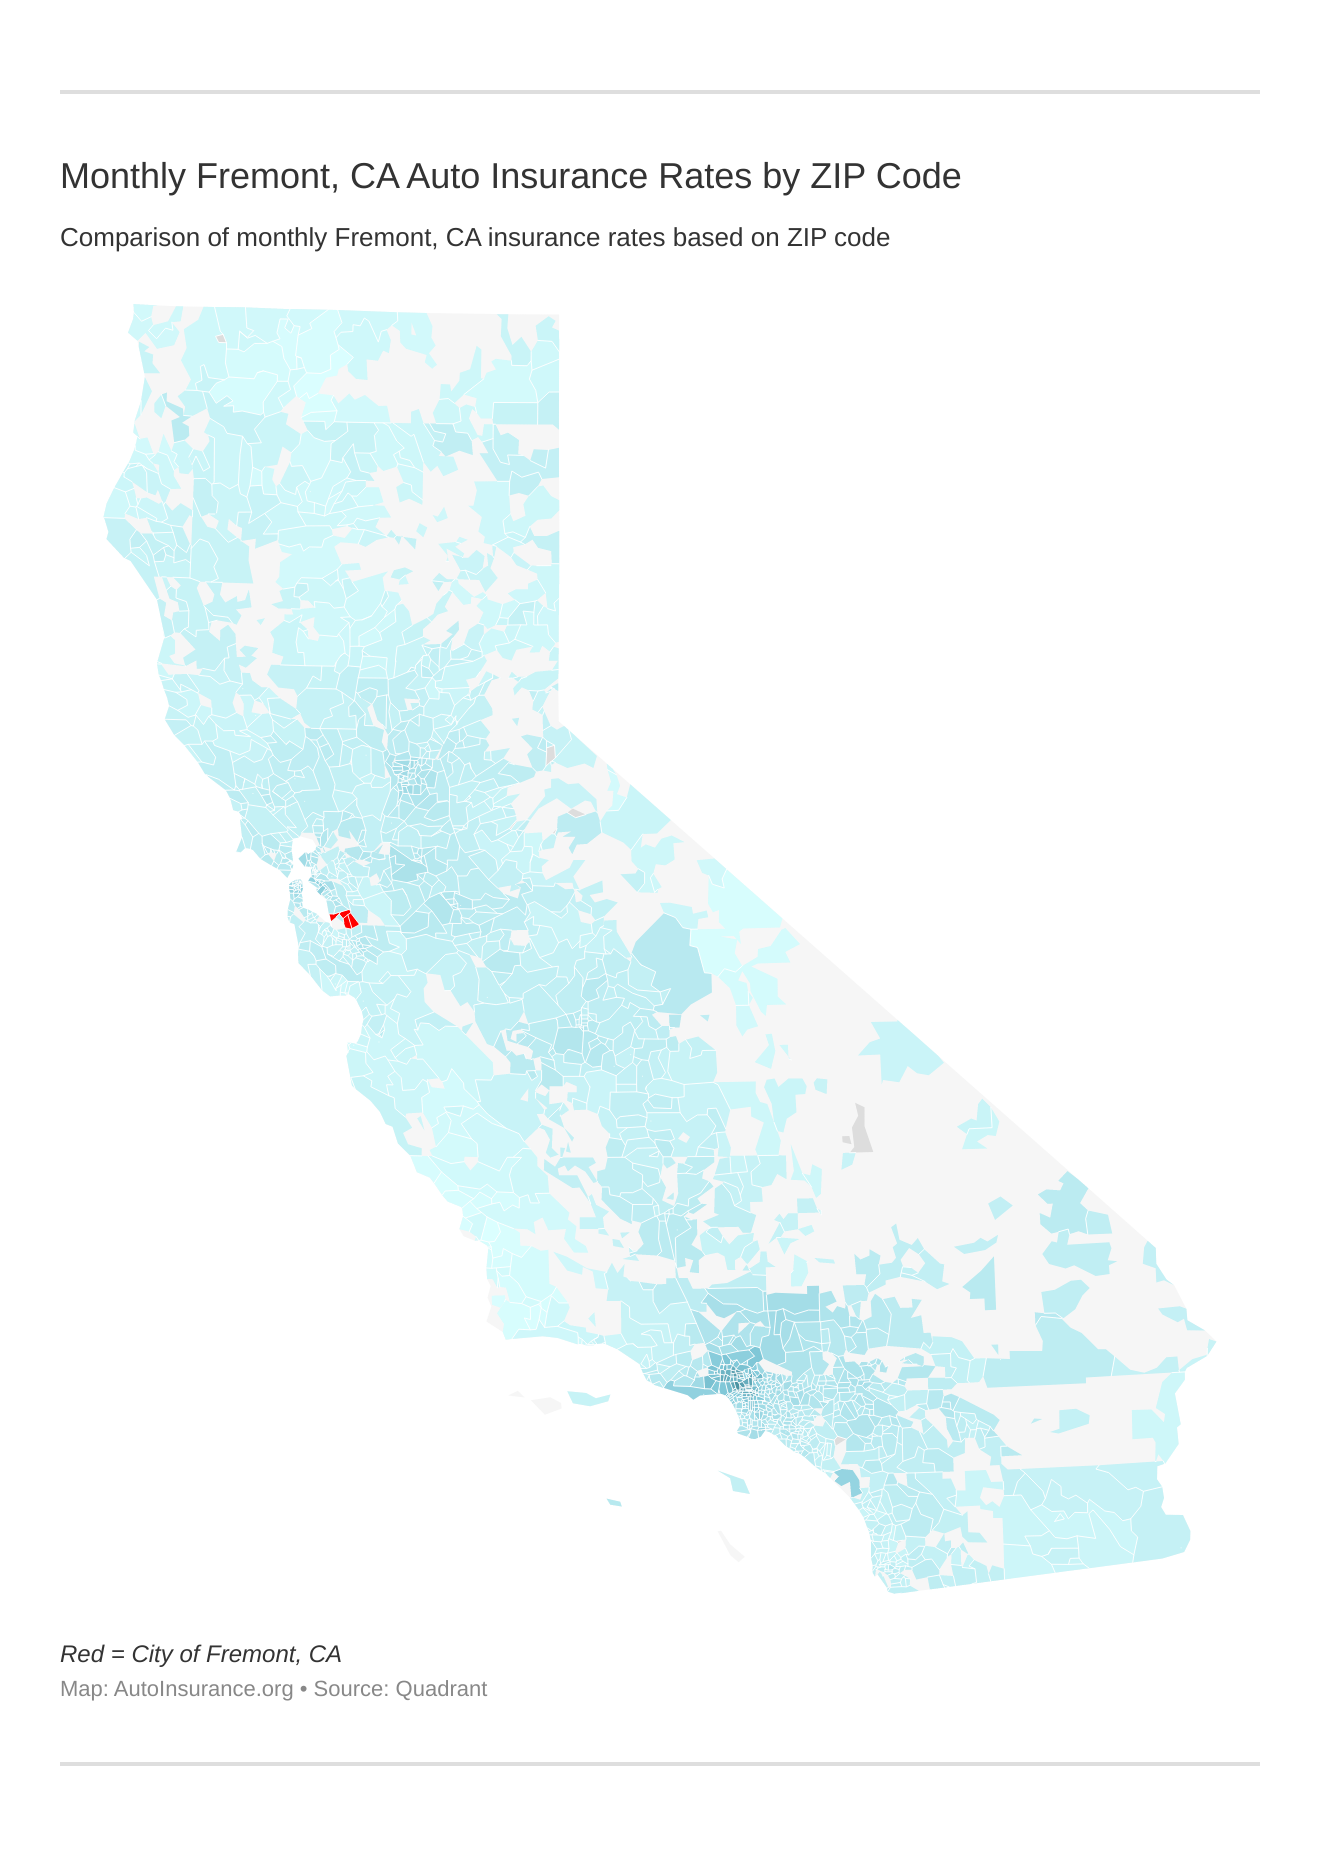 Monthly Fremont, CA Auto Insurance Rates by ZIP Code